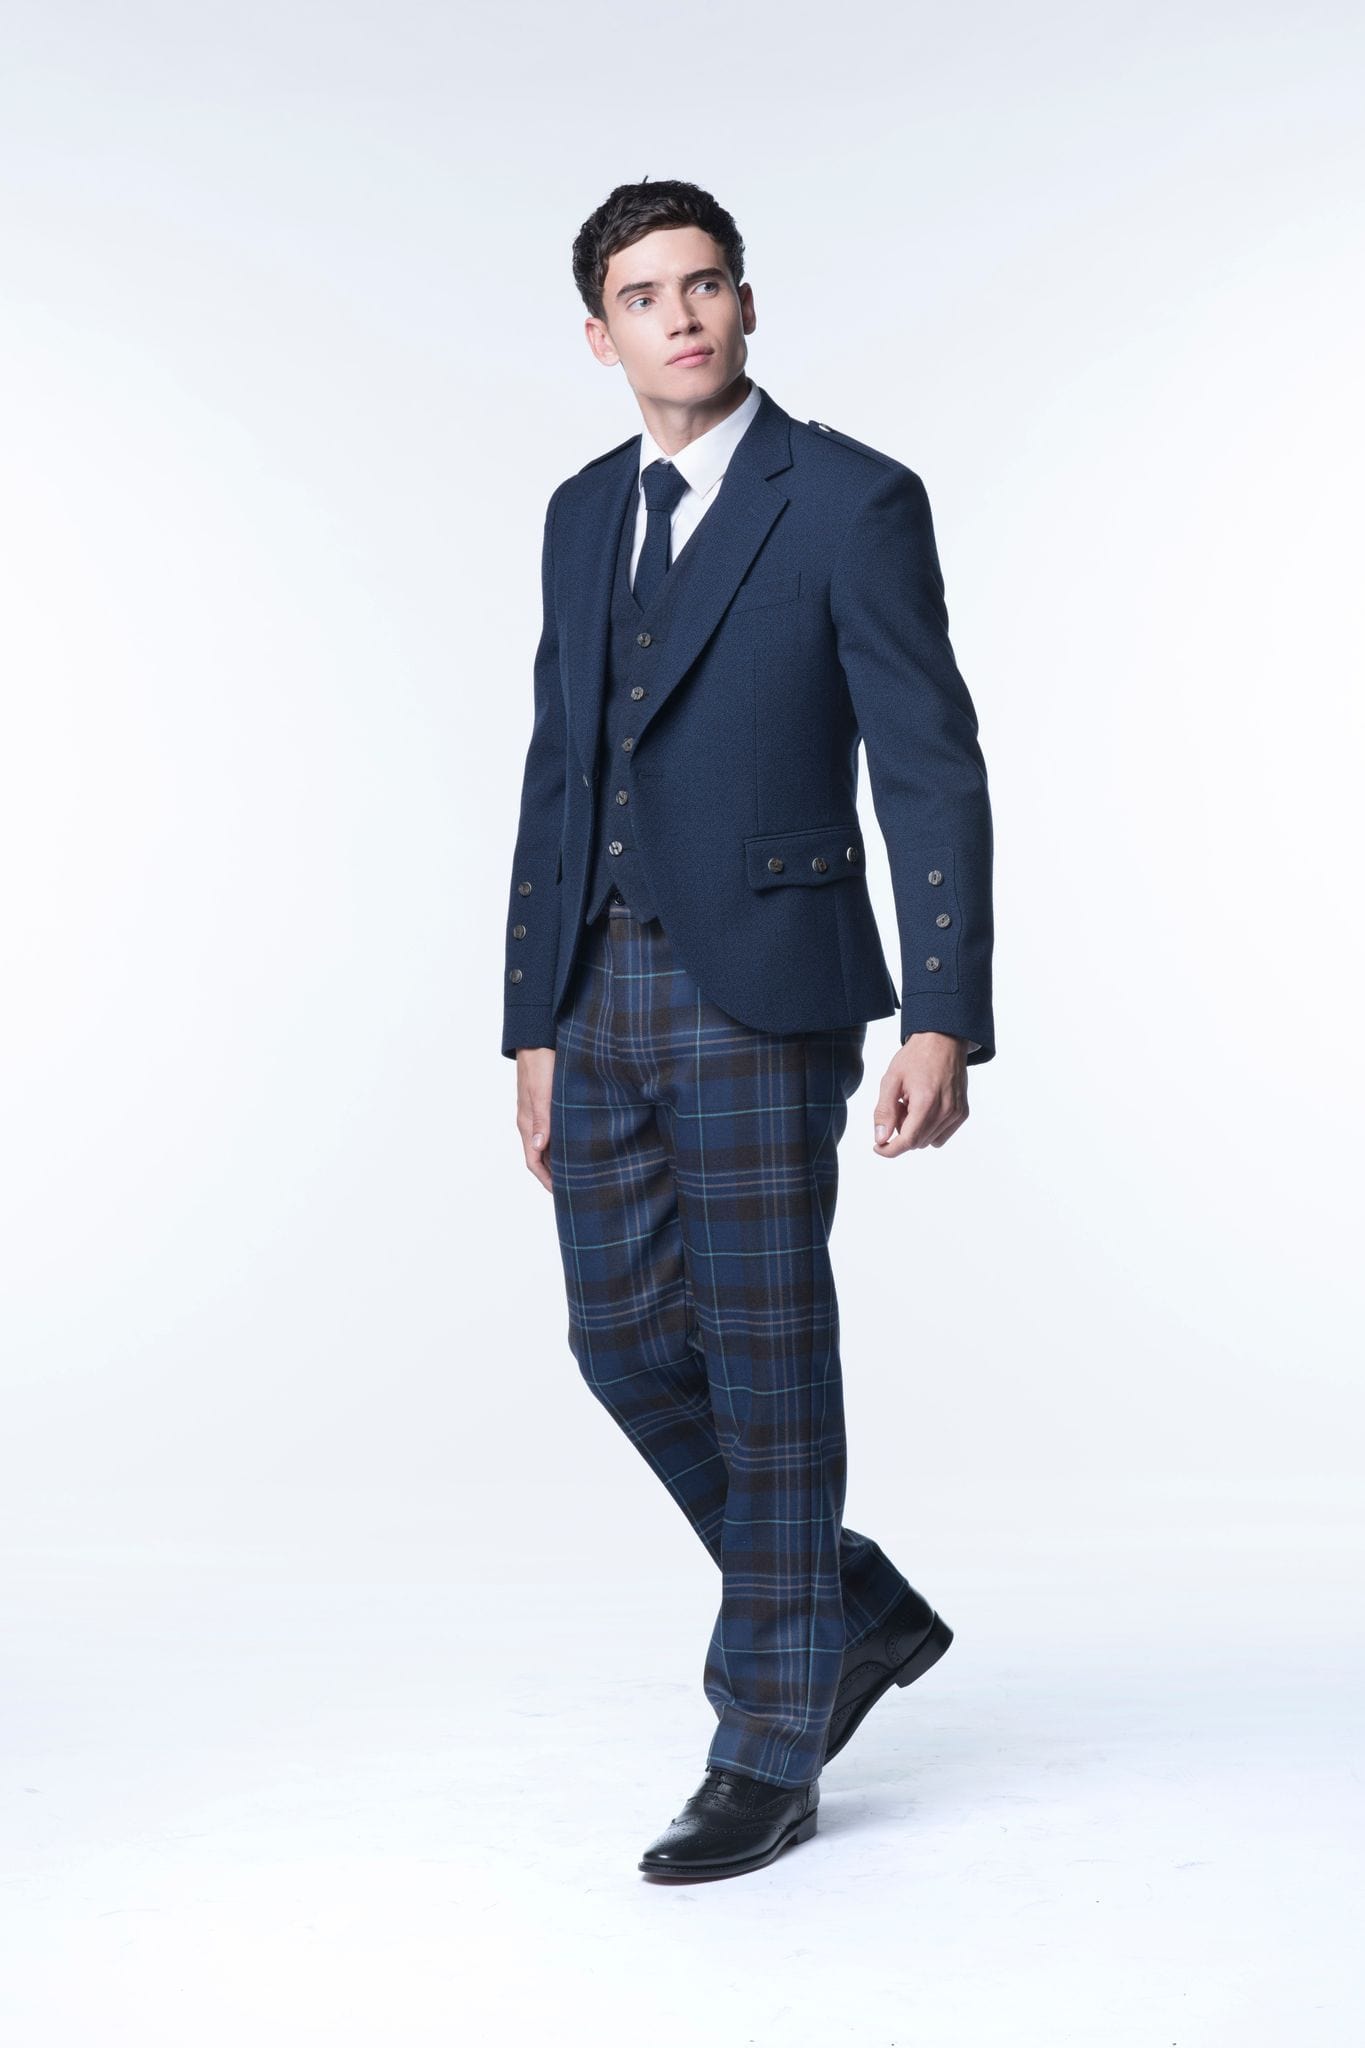 ROGER - Mens Blue Formal Suit Check Trousers Vintage Style – XPOSED